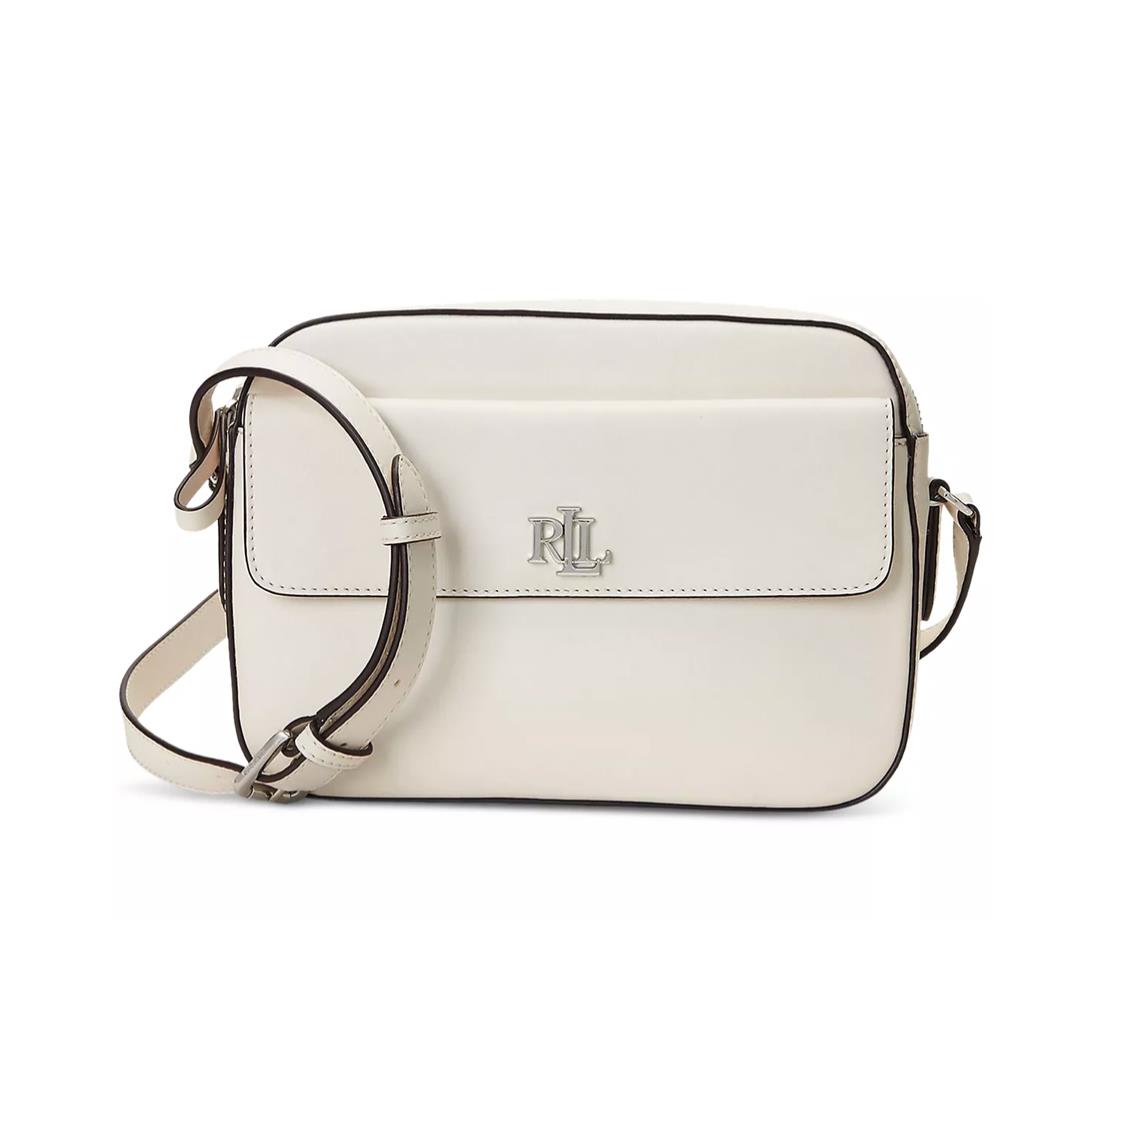 Ralph Lauren Leather Marcy Camera Bag White